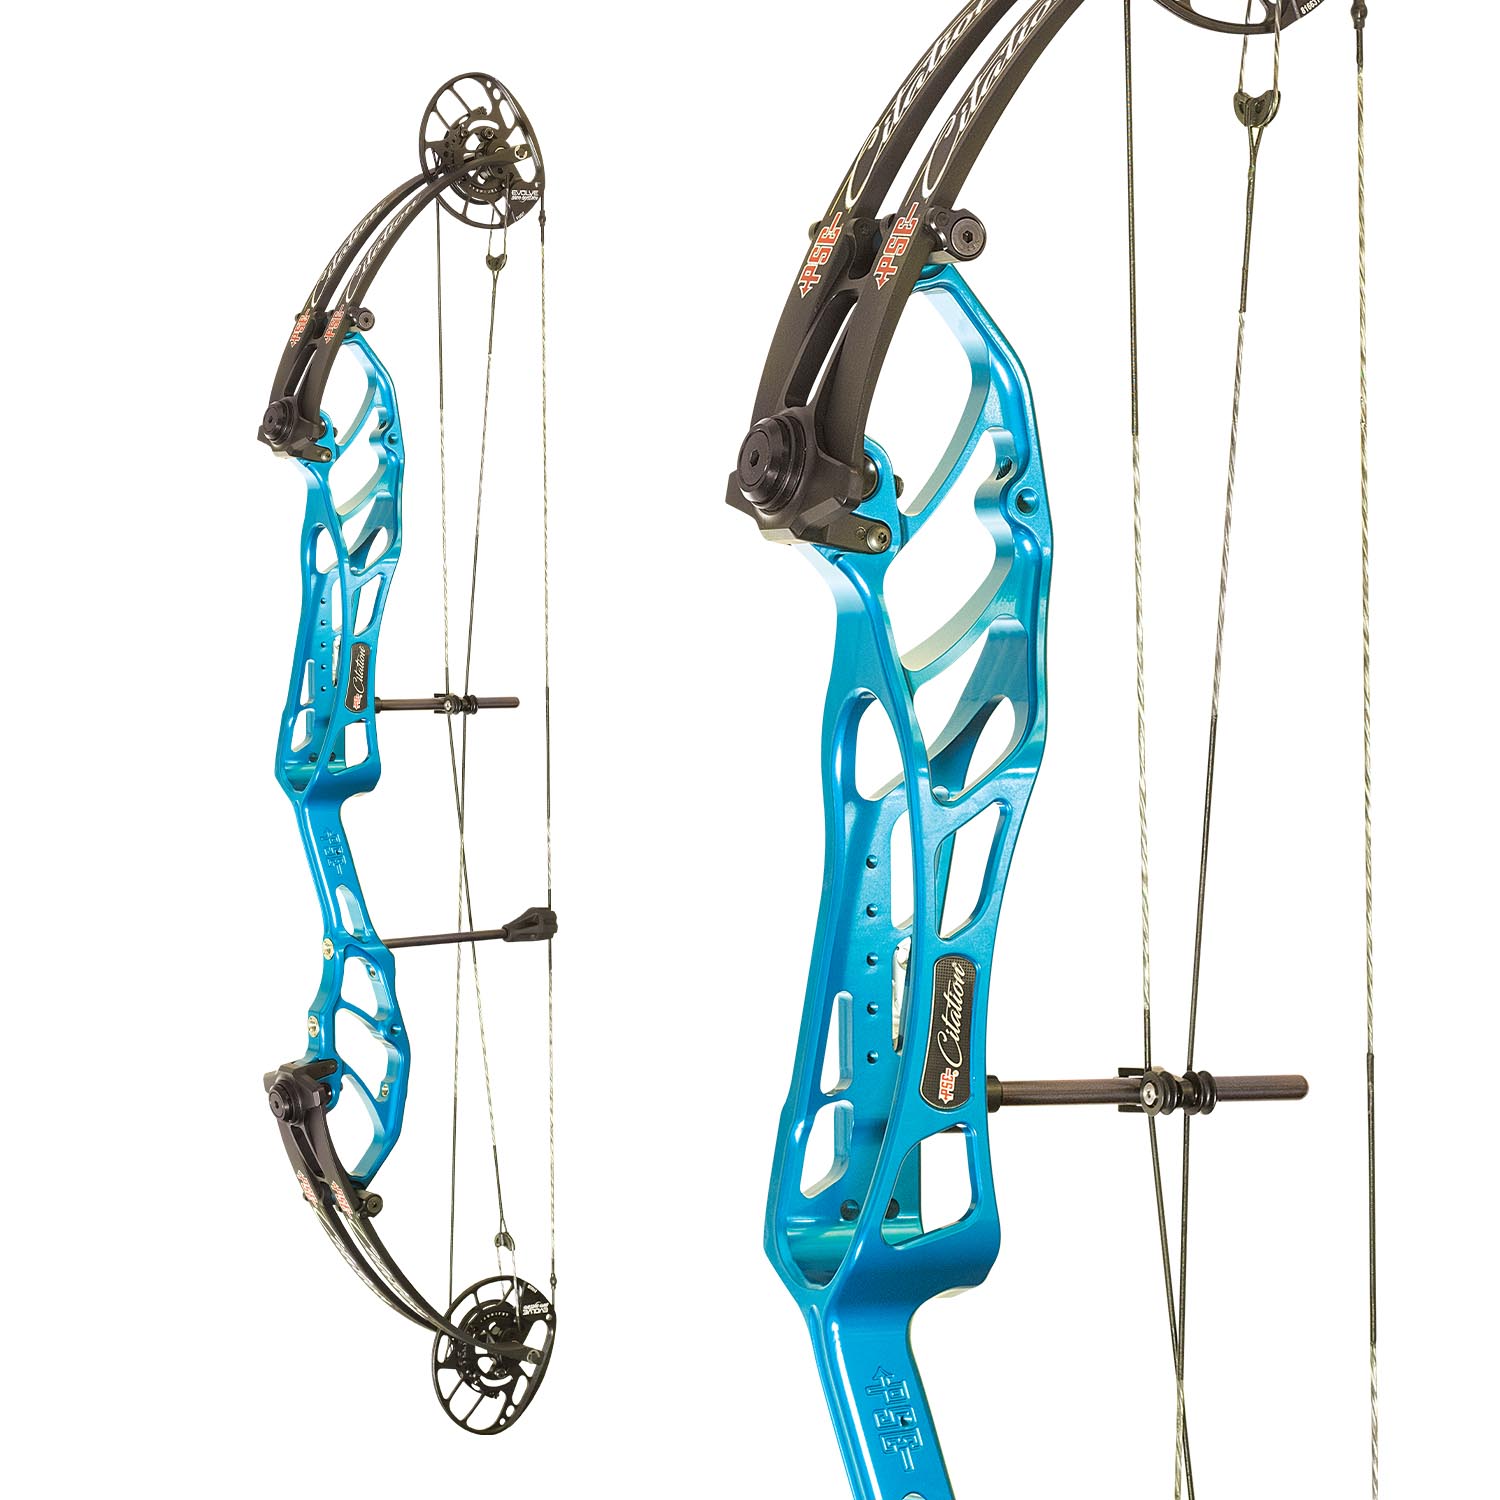 pse compound bow serial numbers